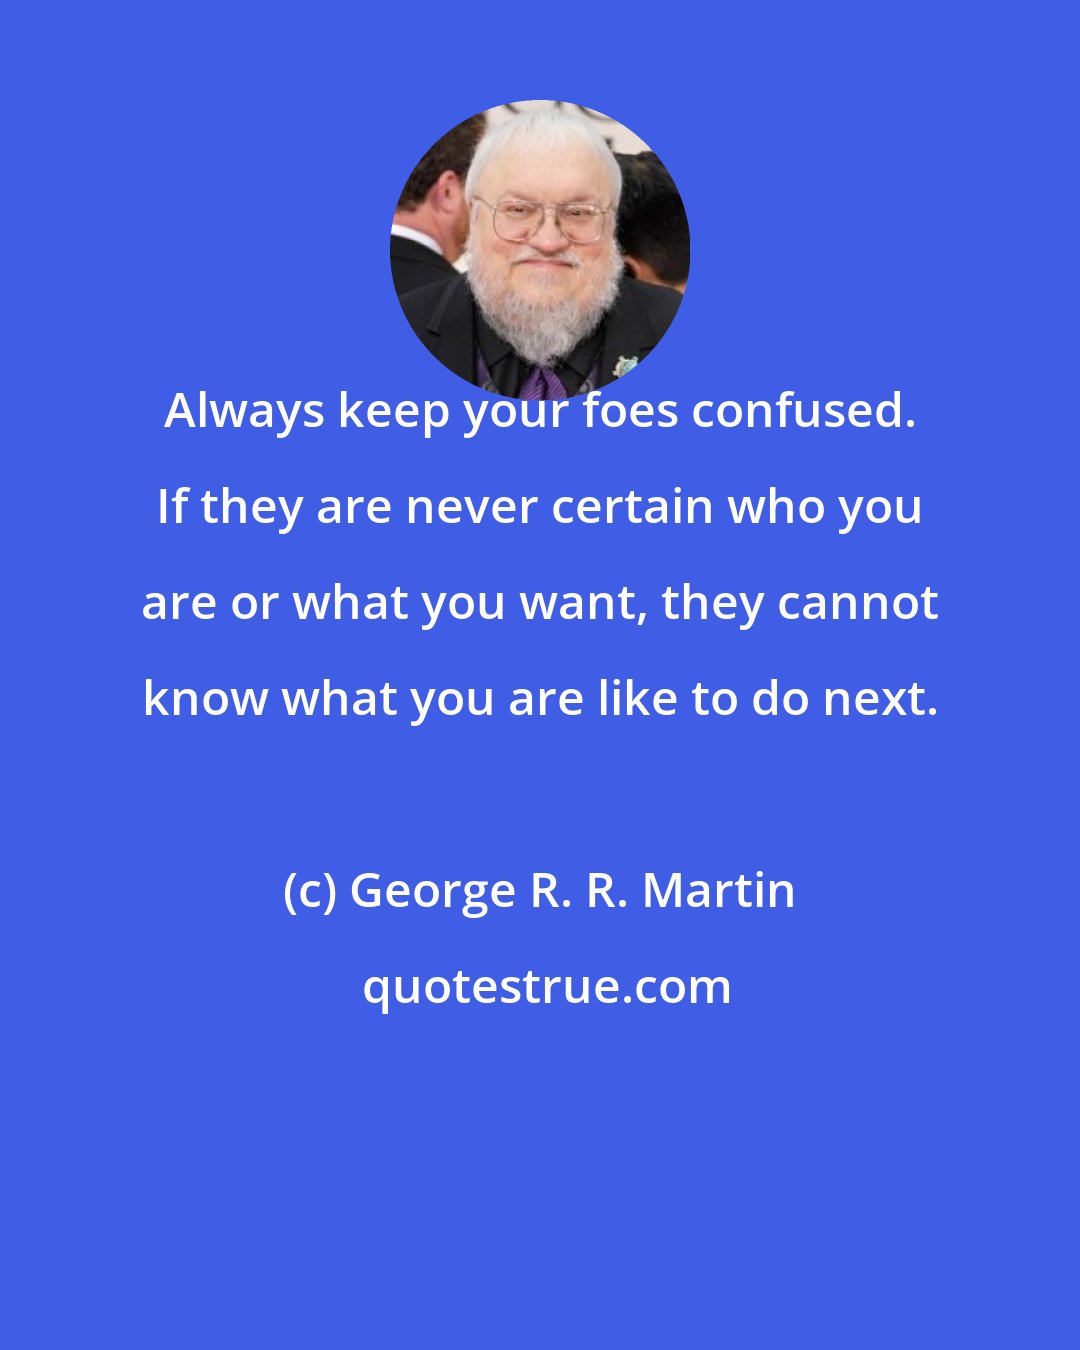 George R. R. Martin: Always keep your foes confused. If they are never certain who you are or what you want, they cannot know what you are like to do next.